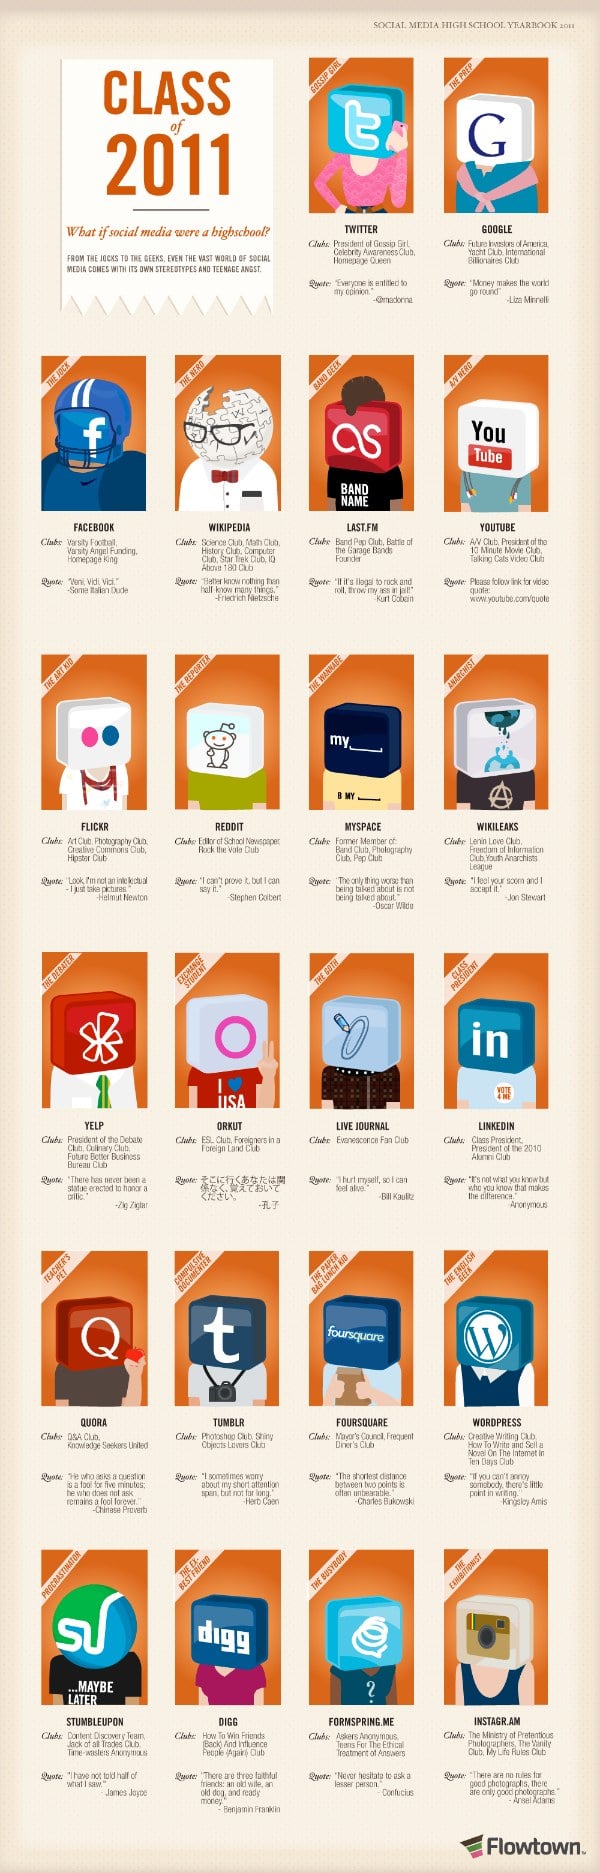 Social Networking Services Highschool Infographic